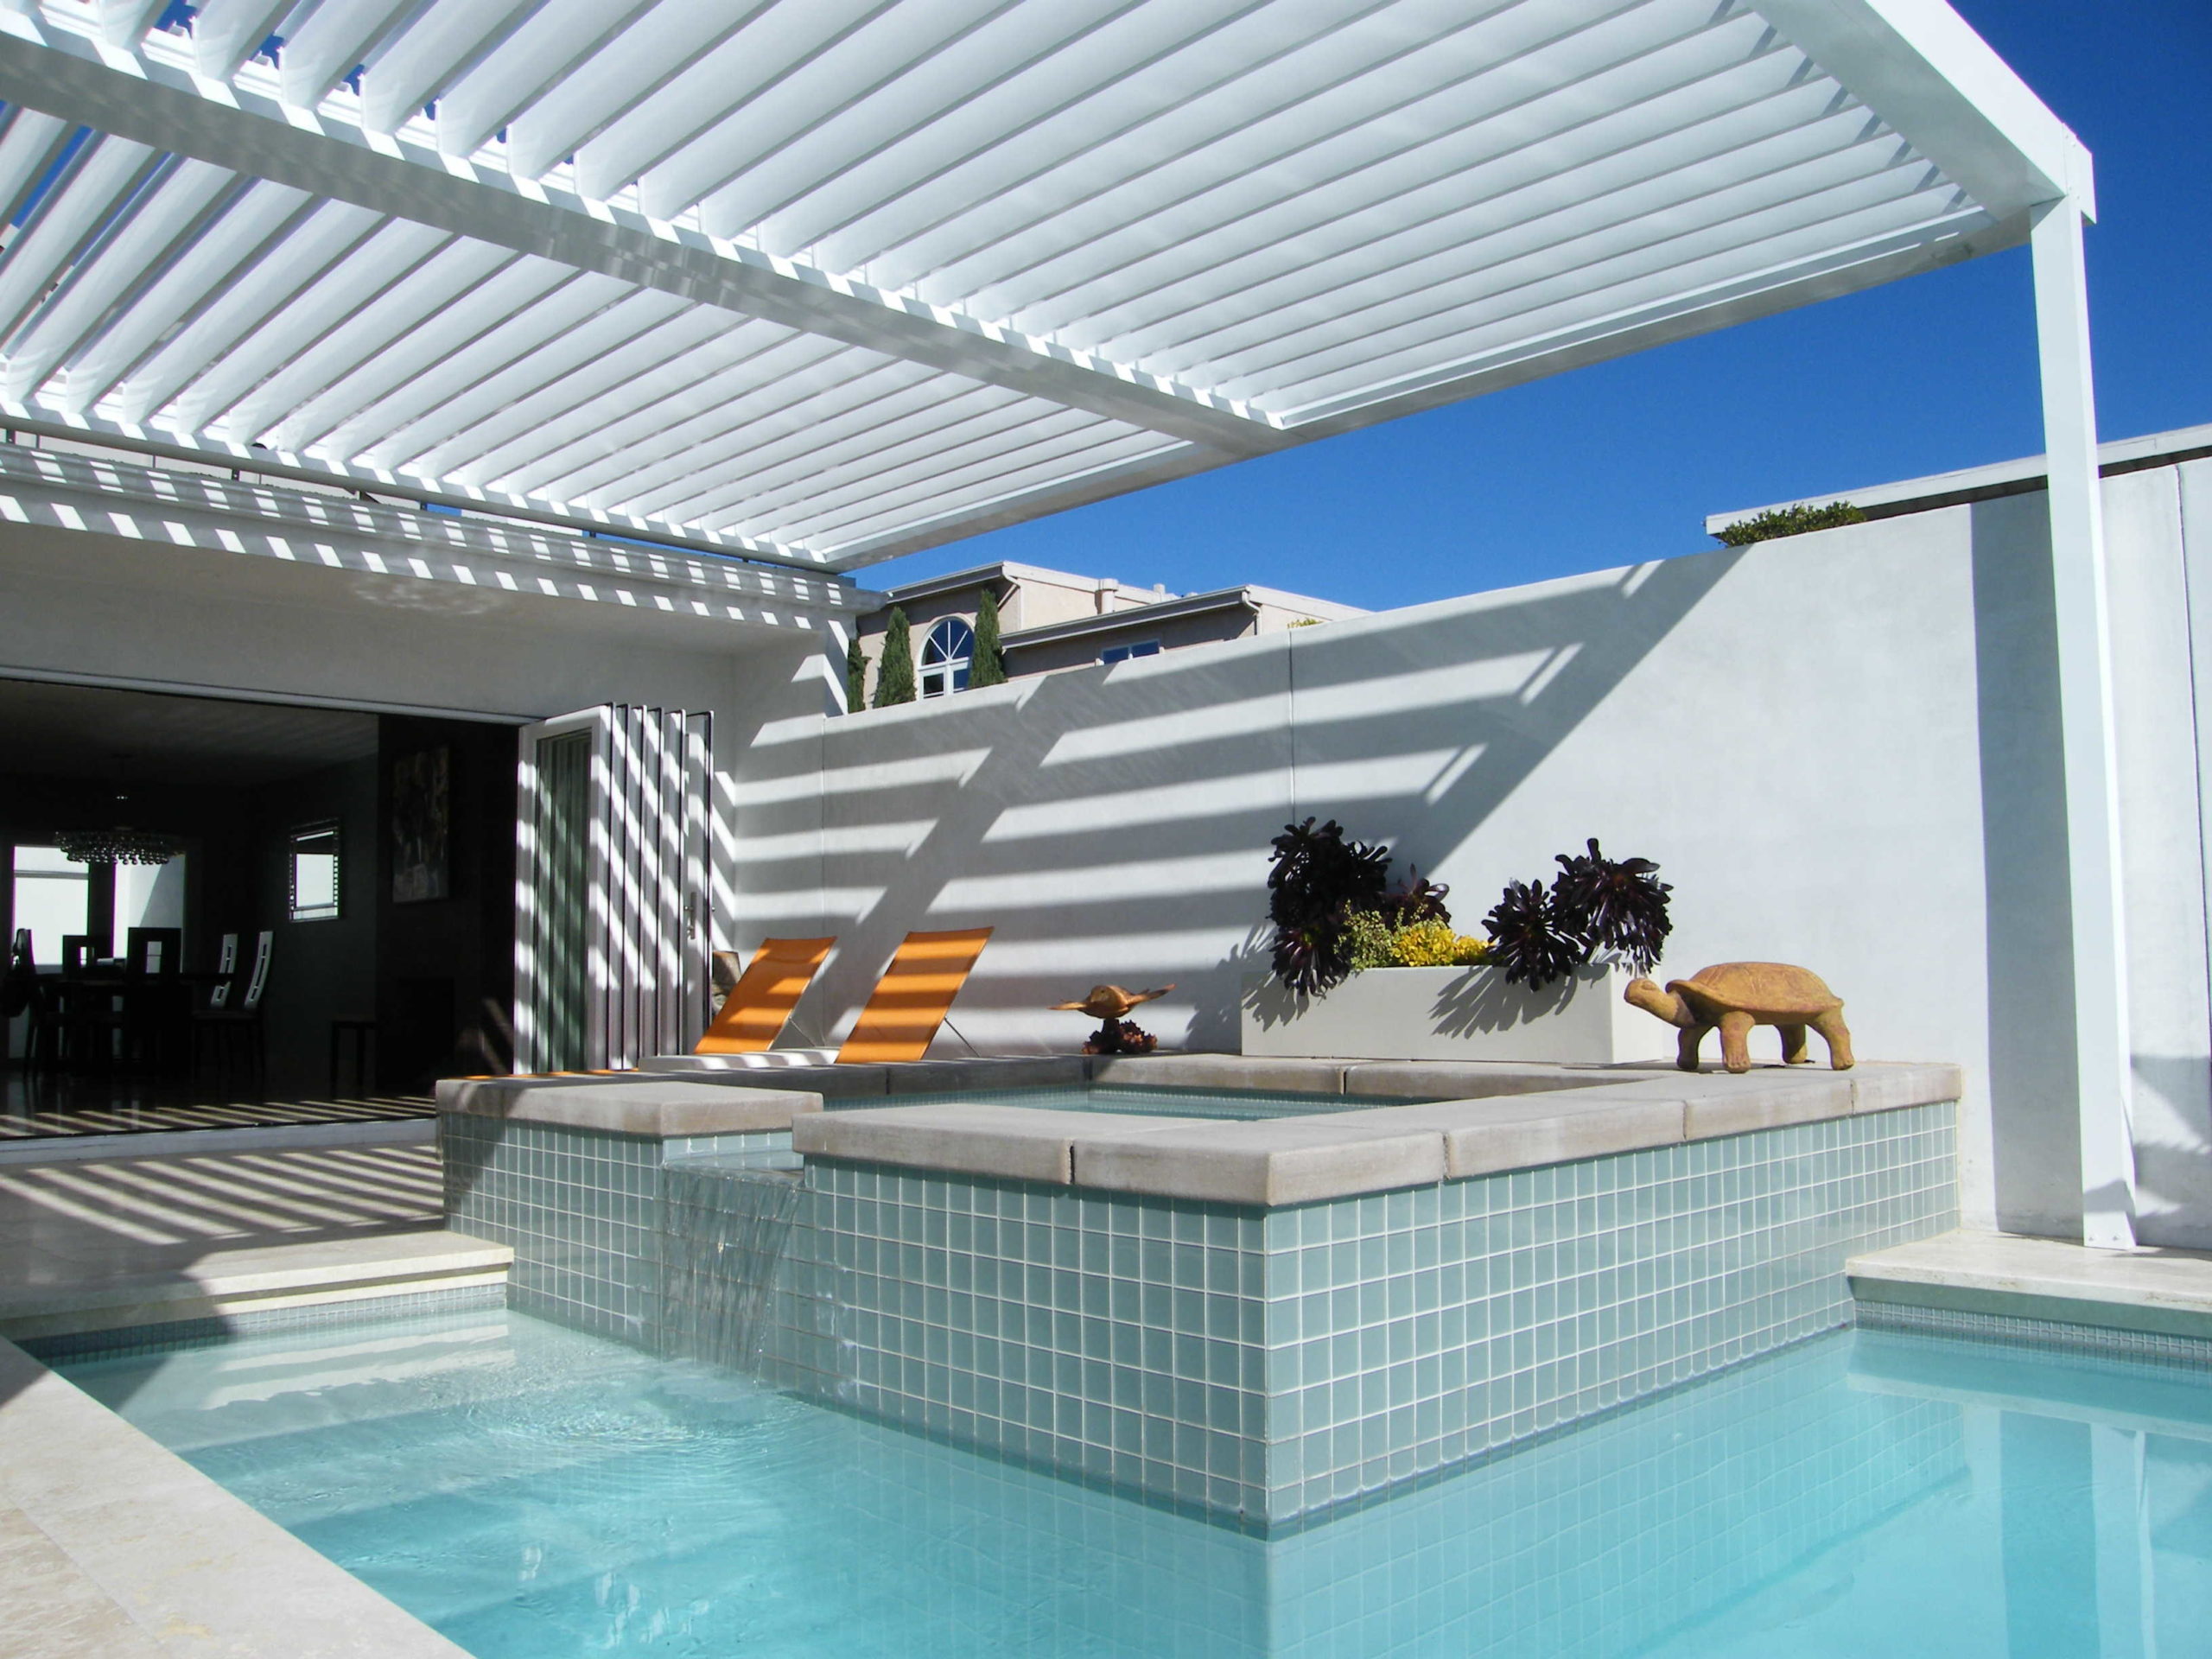 Equinox Louvered Roof System Patio Covers in Dana Point, CA.